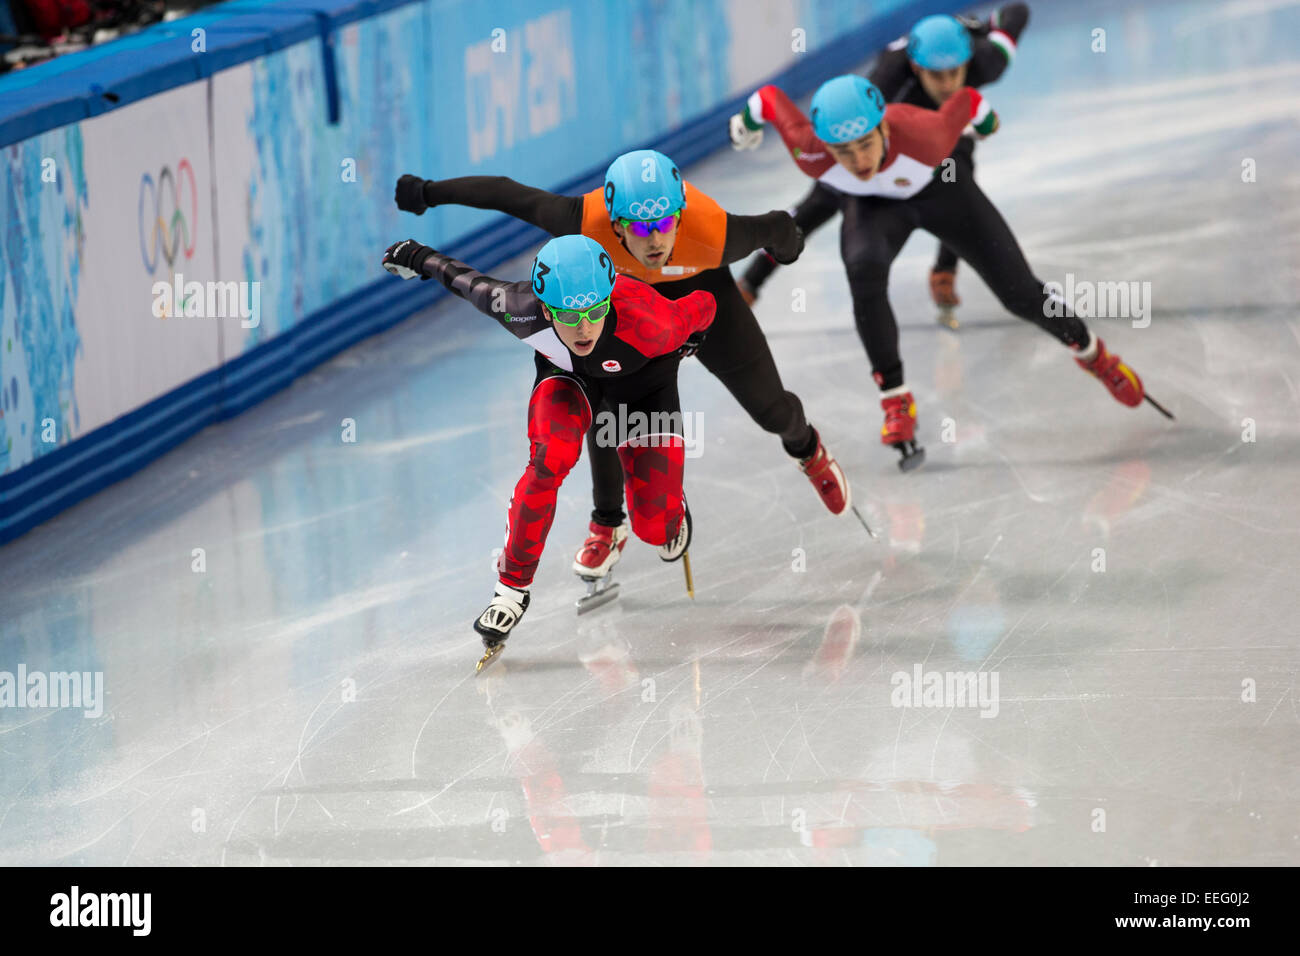 Short Track Speed Skating at the Olympic Winter Games, Sochi 2014 Stock Photo